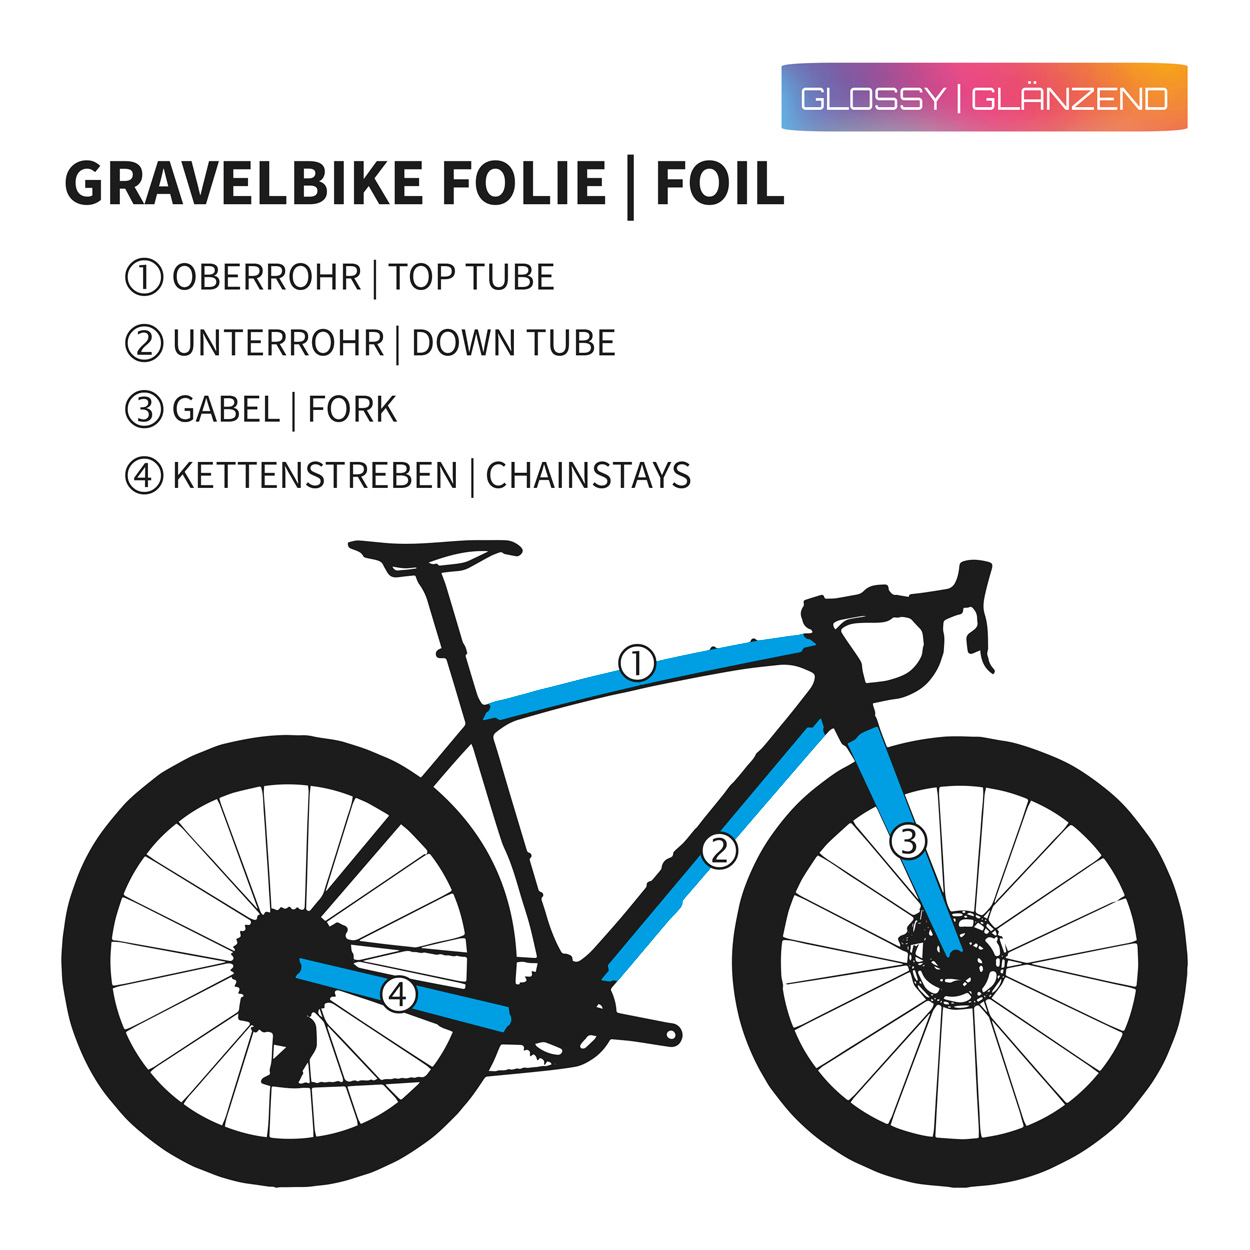 Custom Gravelbike frame protection film glossy - Unleazhed